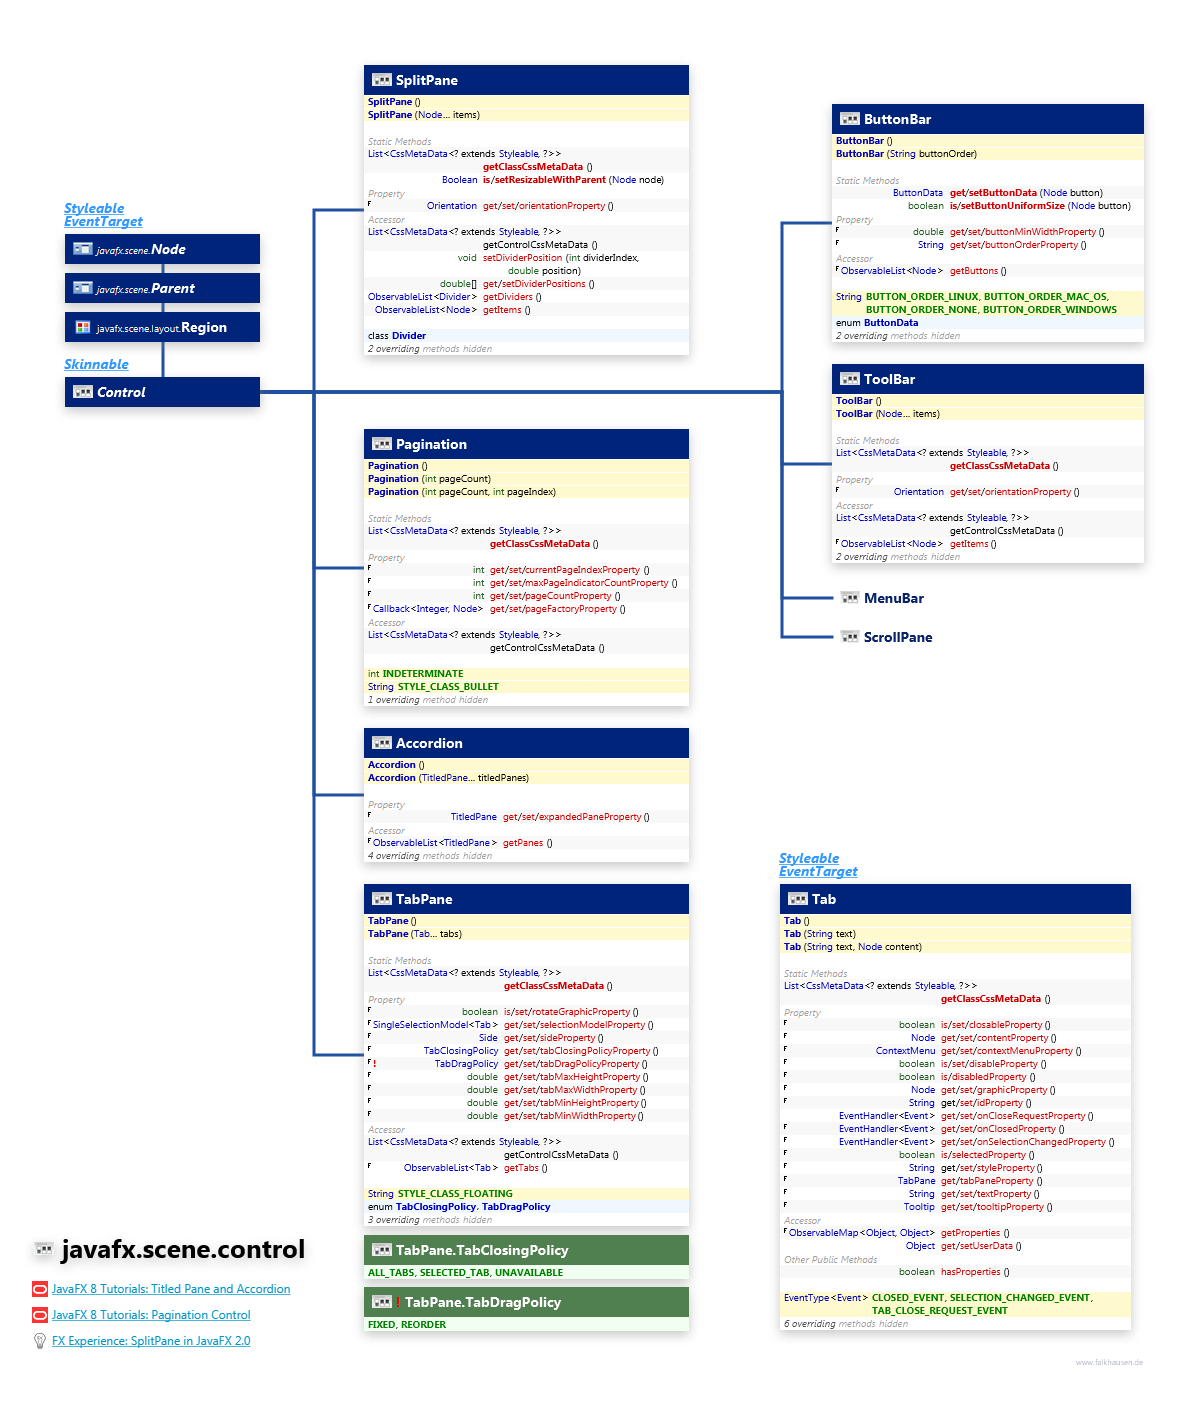 javafx.scene.control Container class diagram and api documentation for JavaFX 10